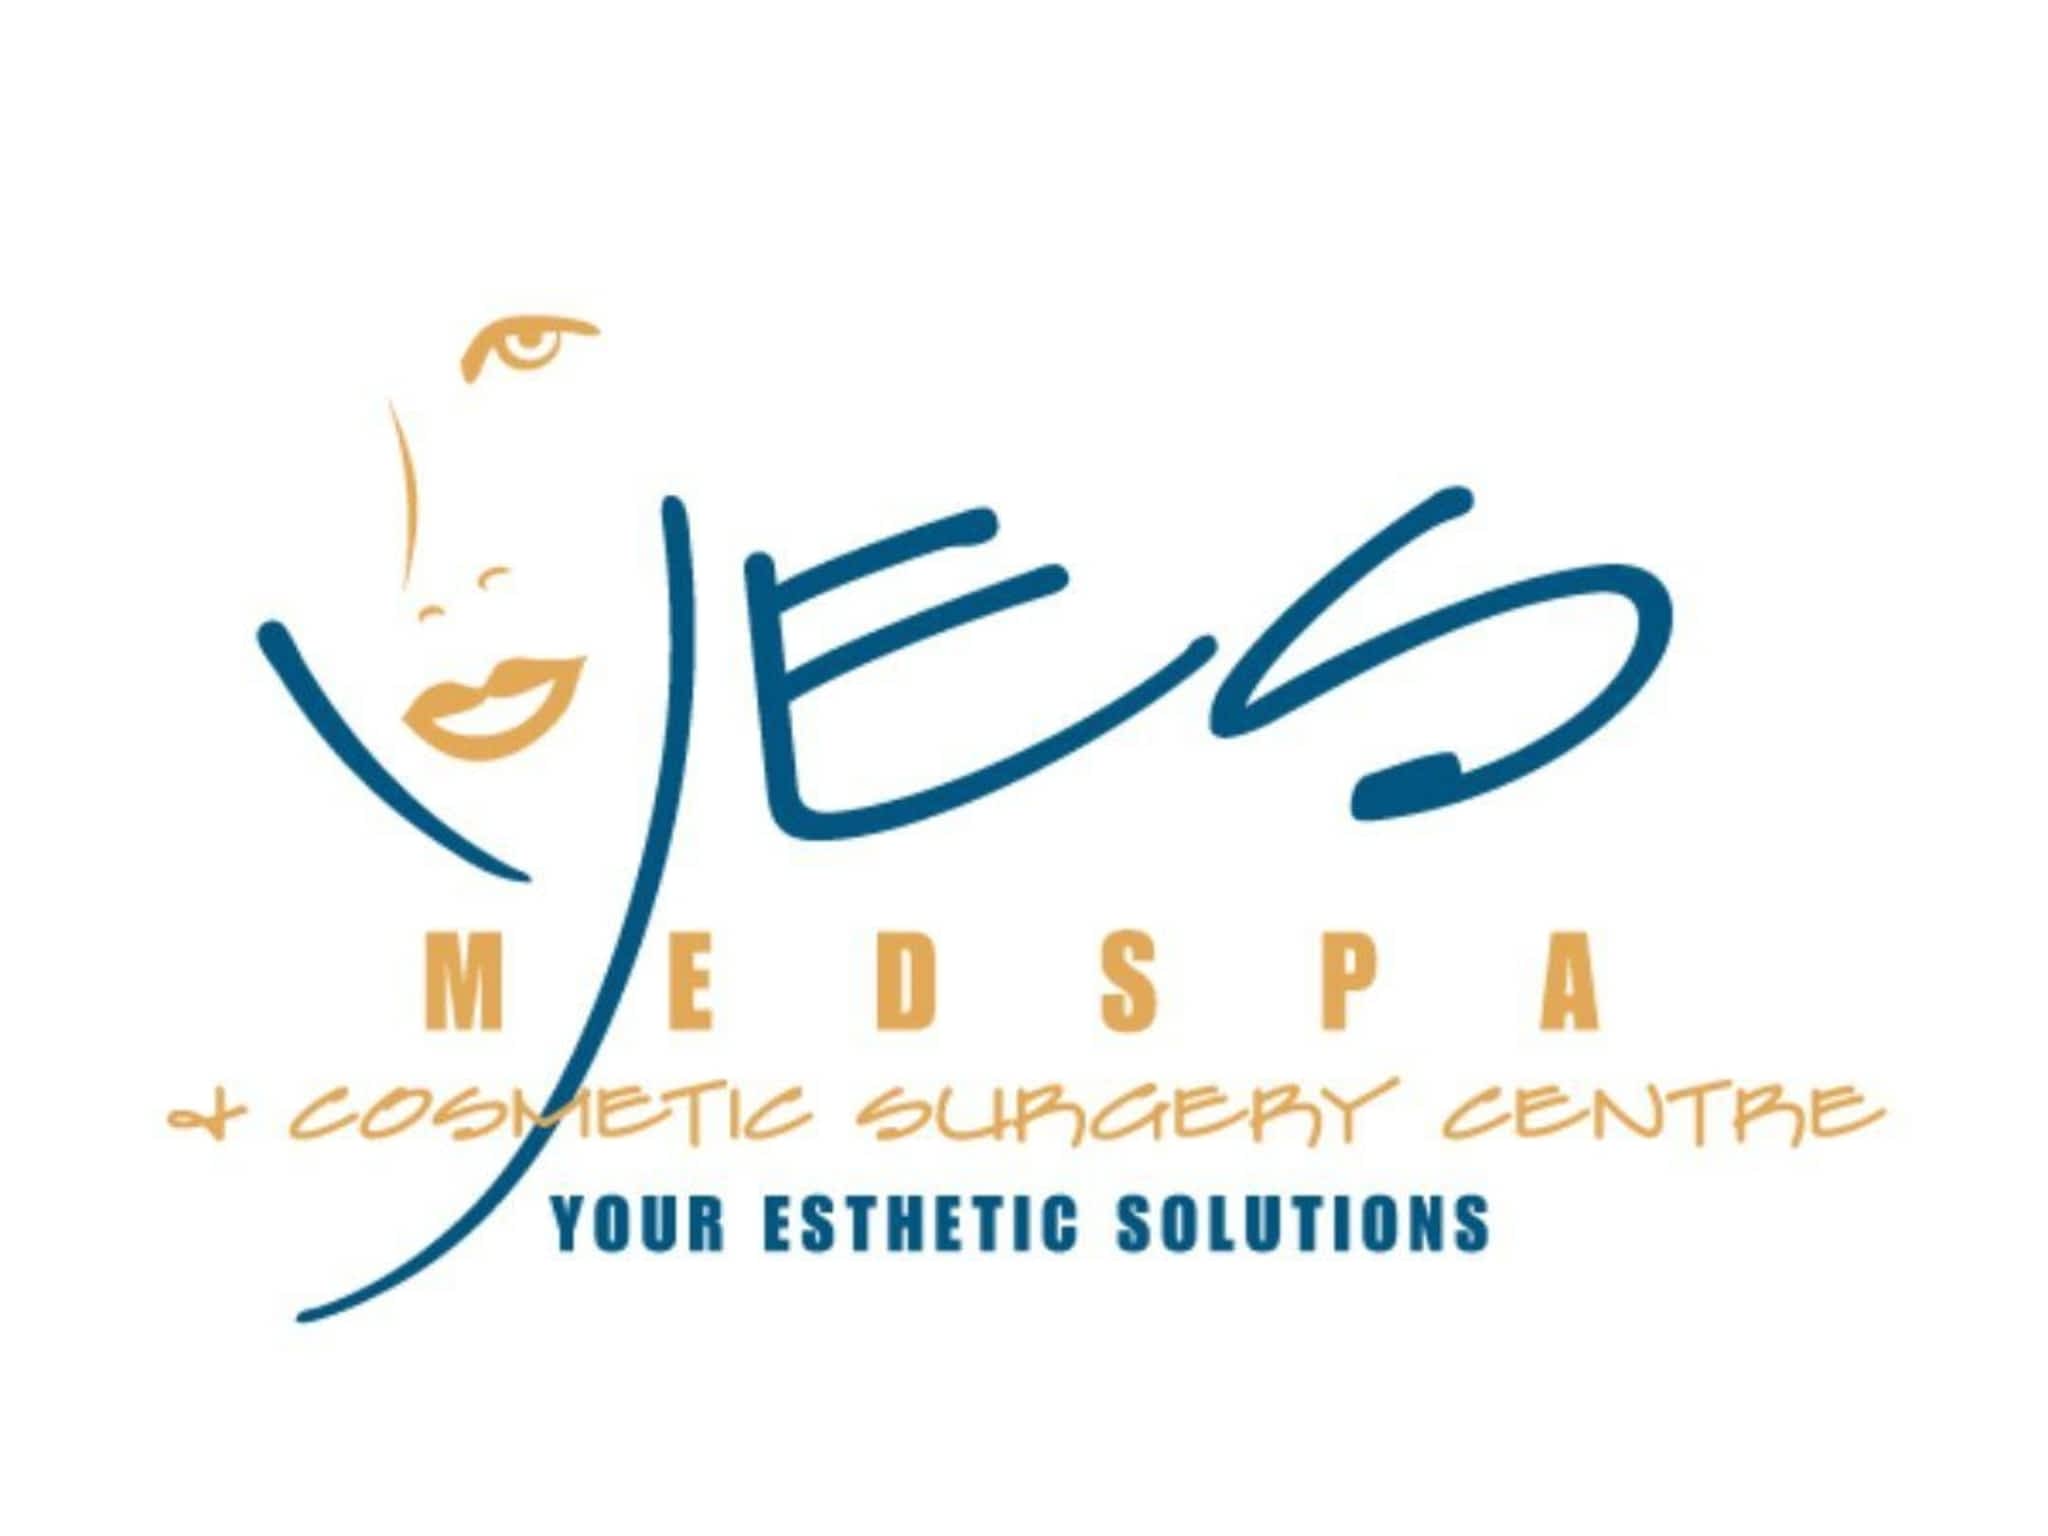 photo YES Medspa & Cosmetic Surgery Centre